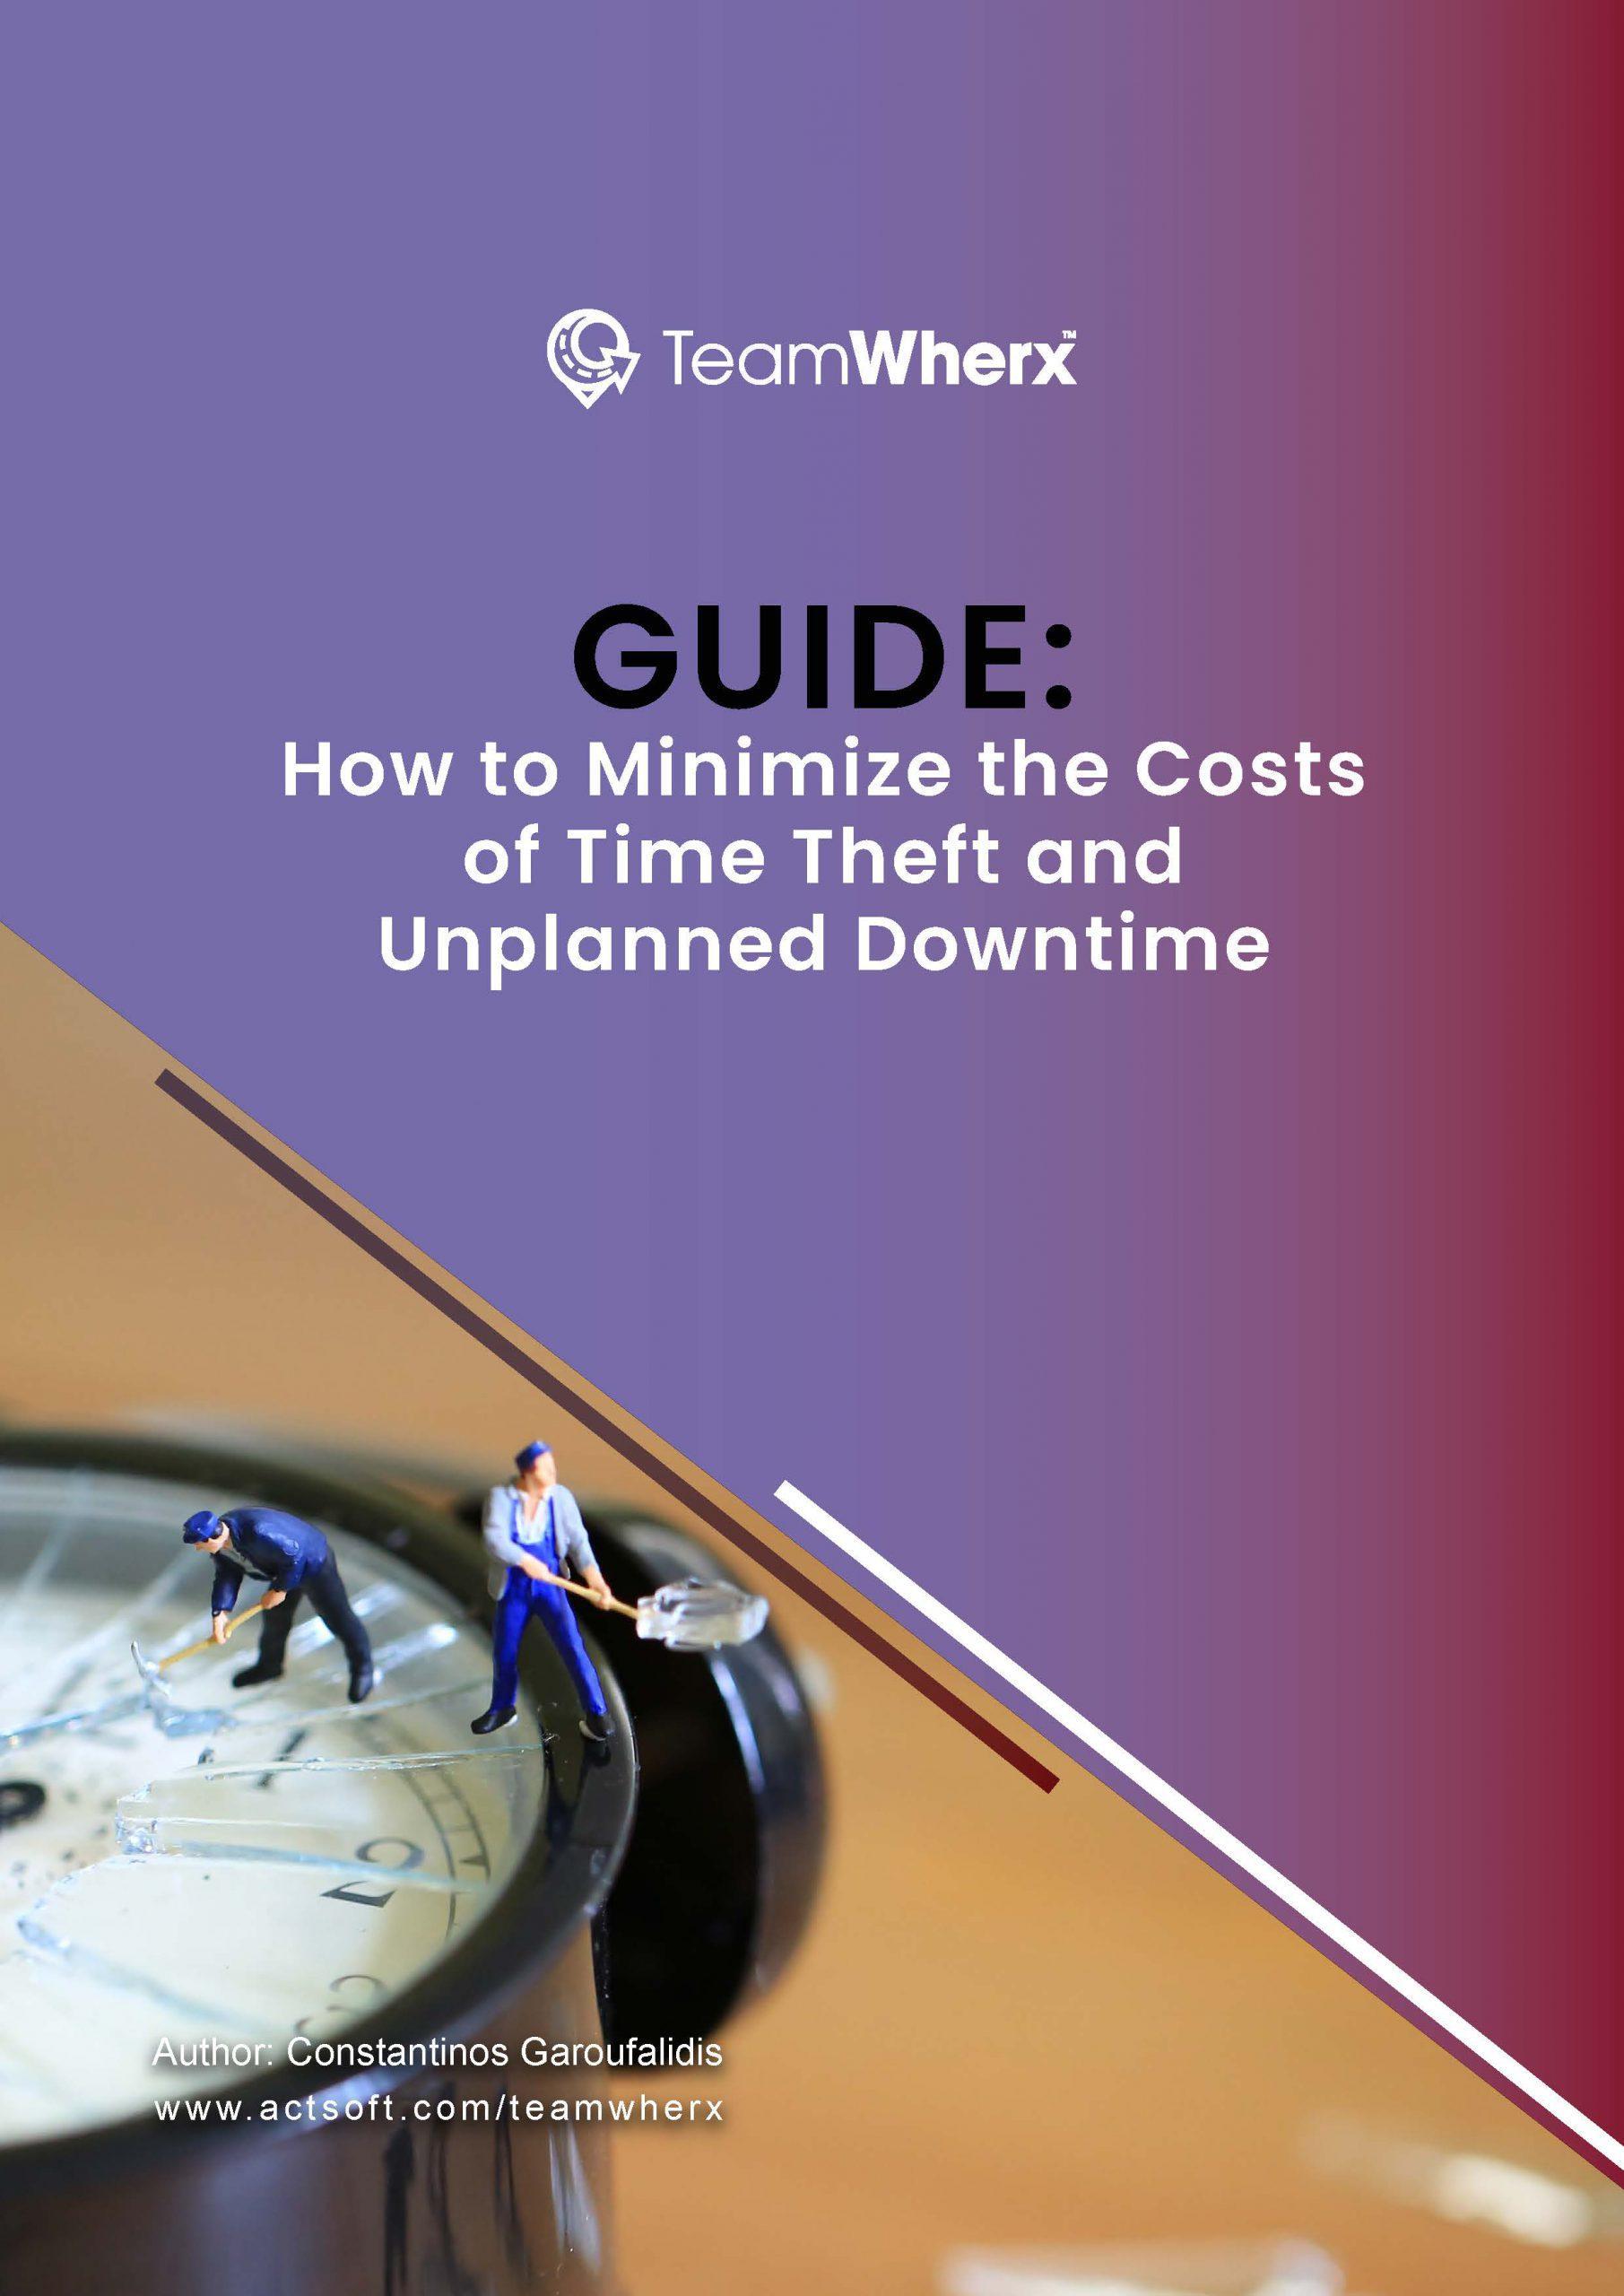 How to Minimize the Costs of Time Theft and Unplanned Downtime